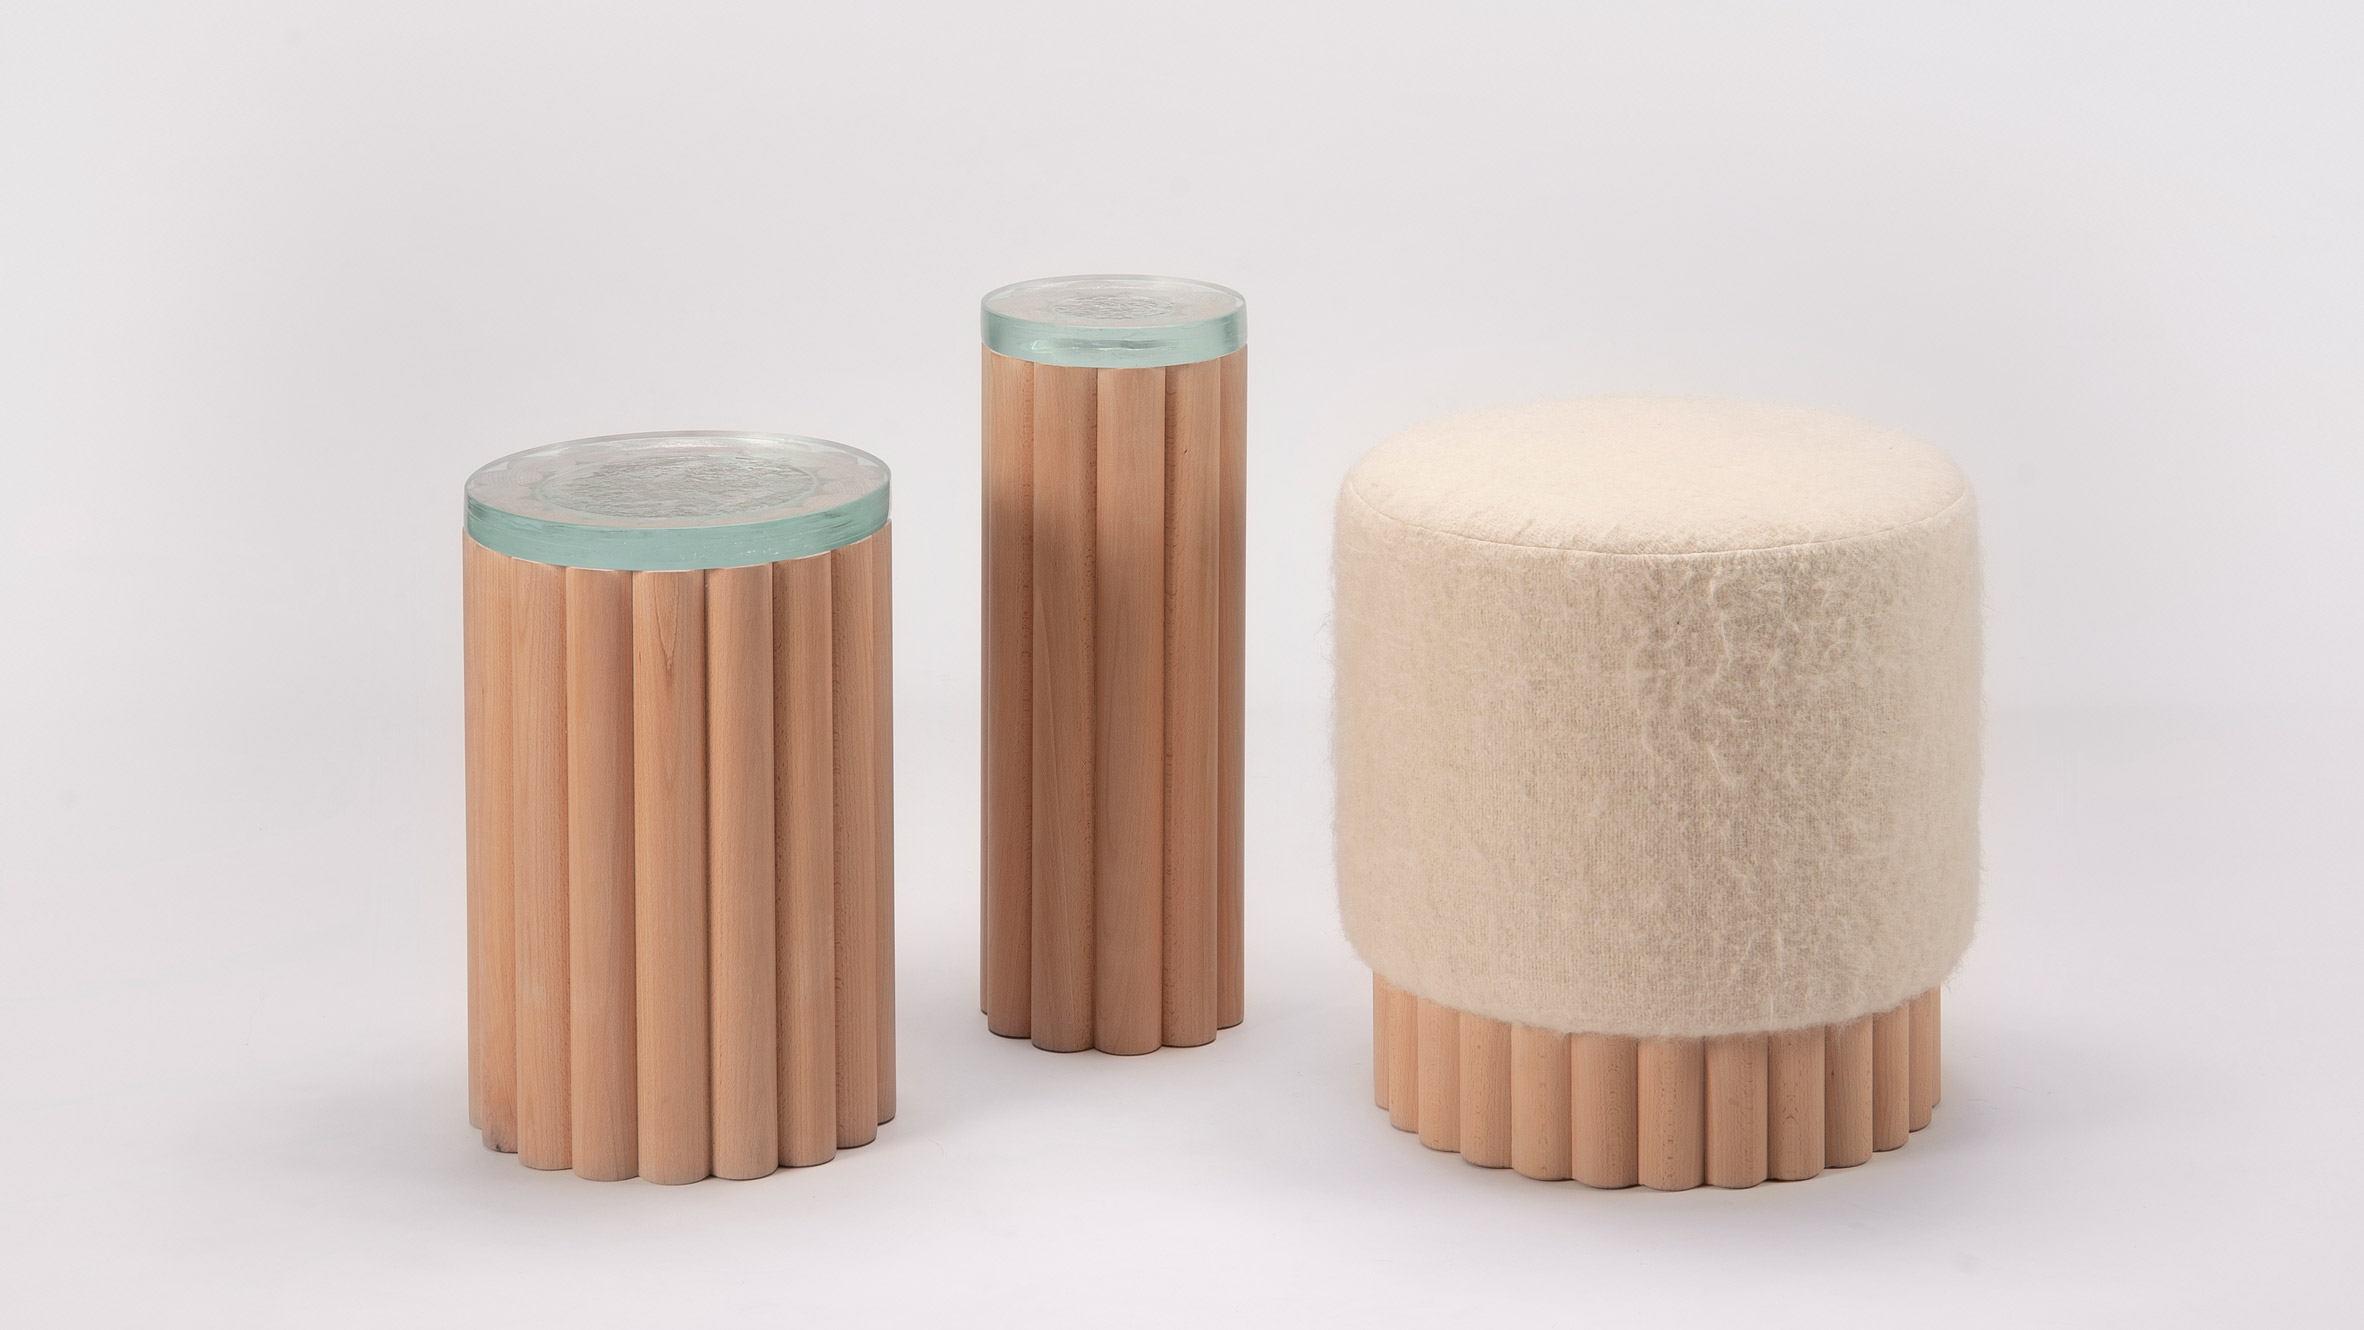 Cylindrical furniture made from beech wood dowels